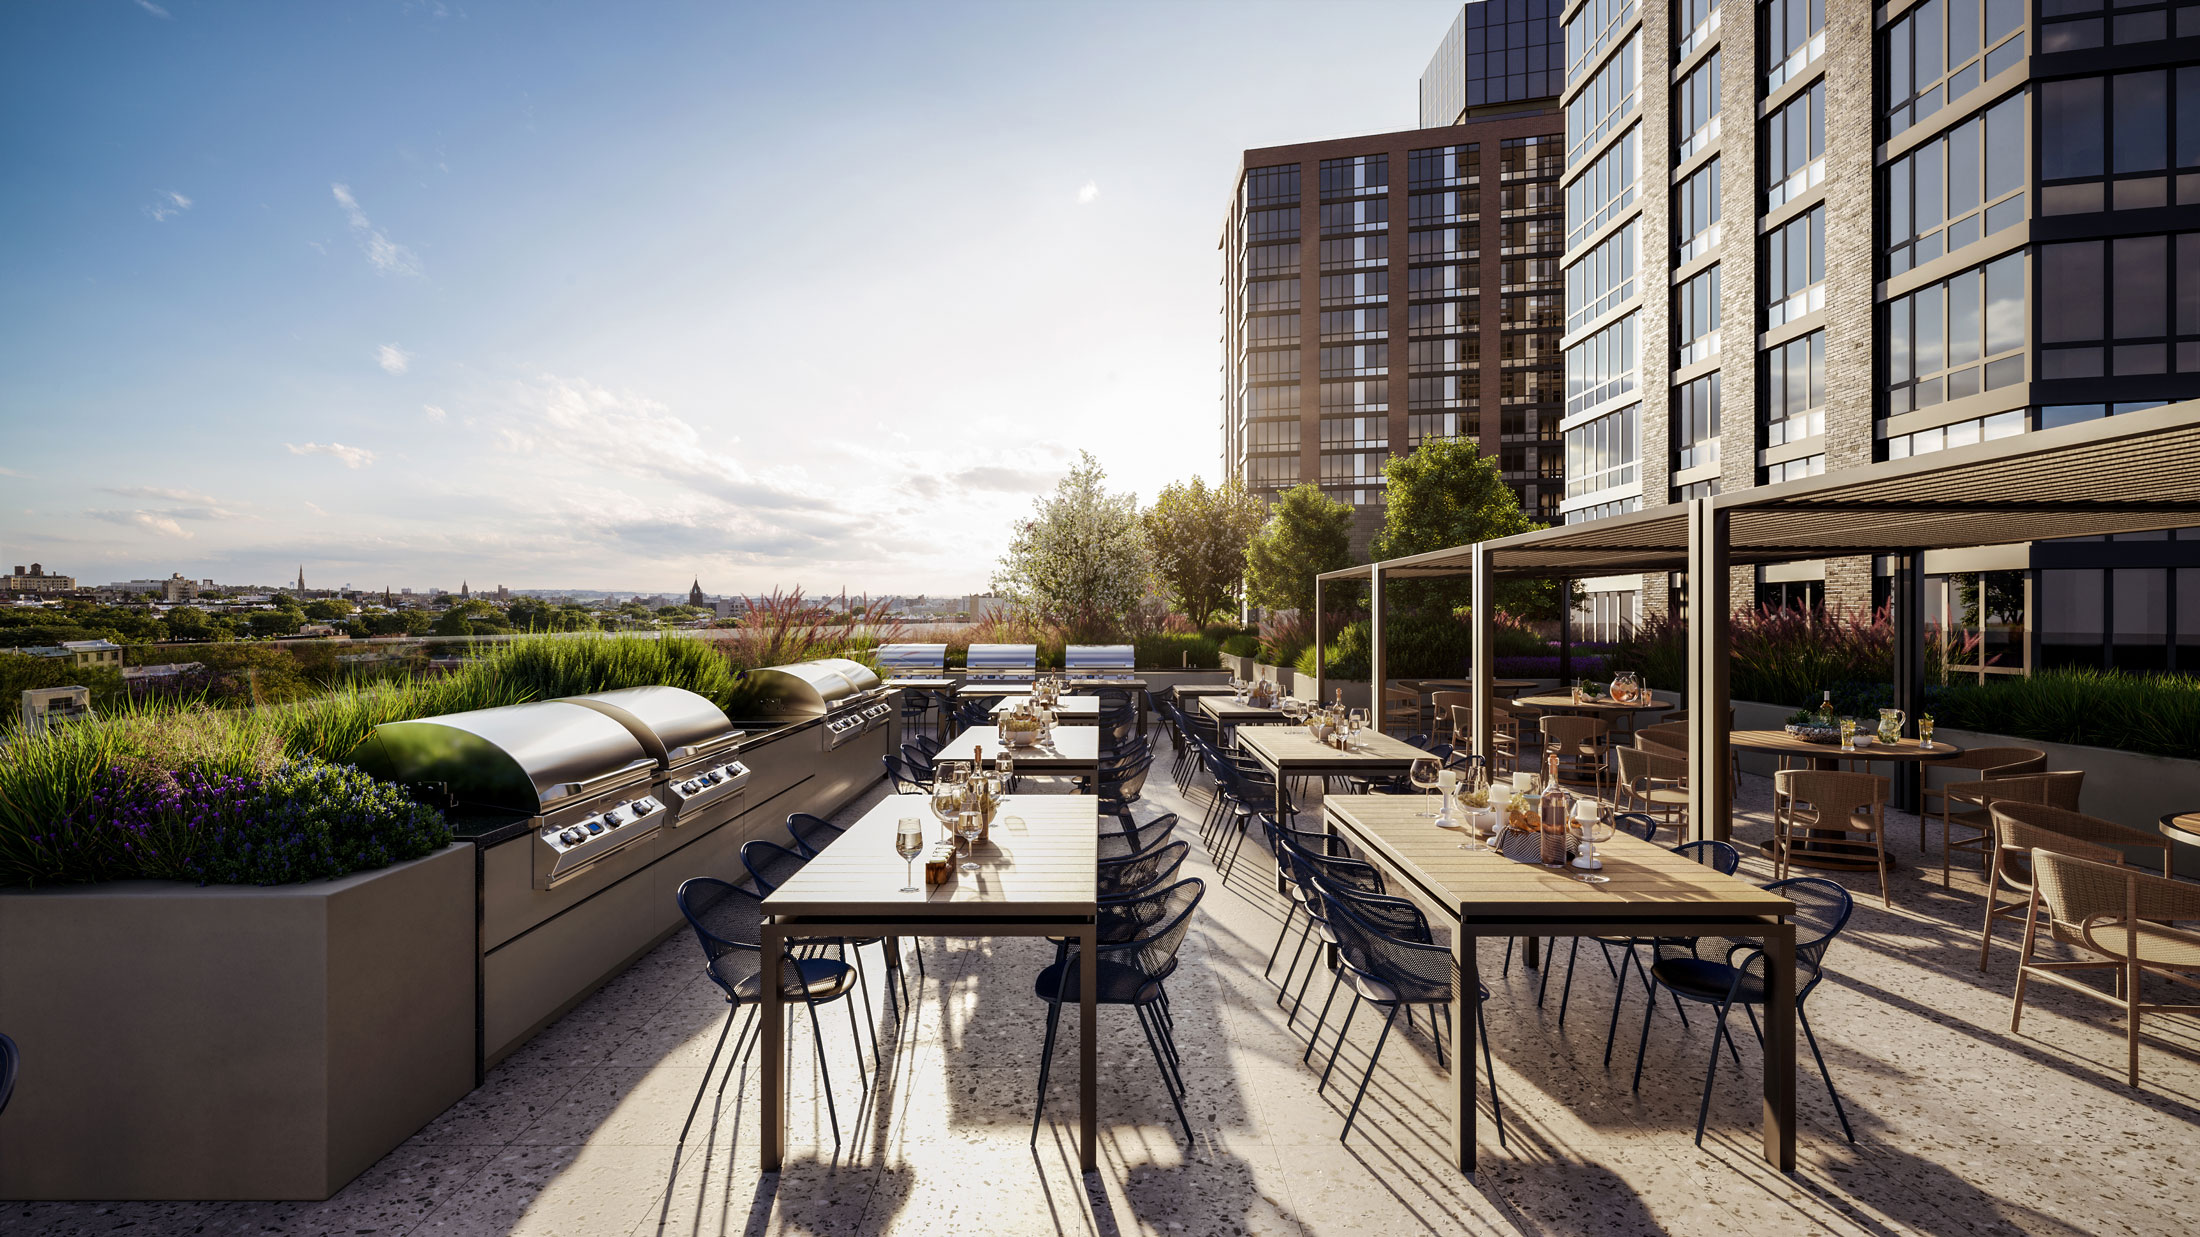 Architectural Rendering of the roof deck of the 595 Dean St project located in Brooklyn, New York